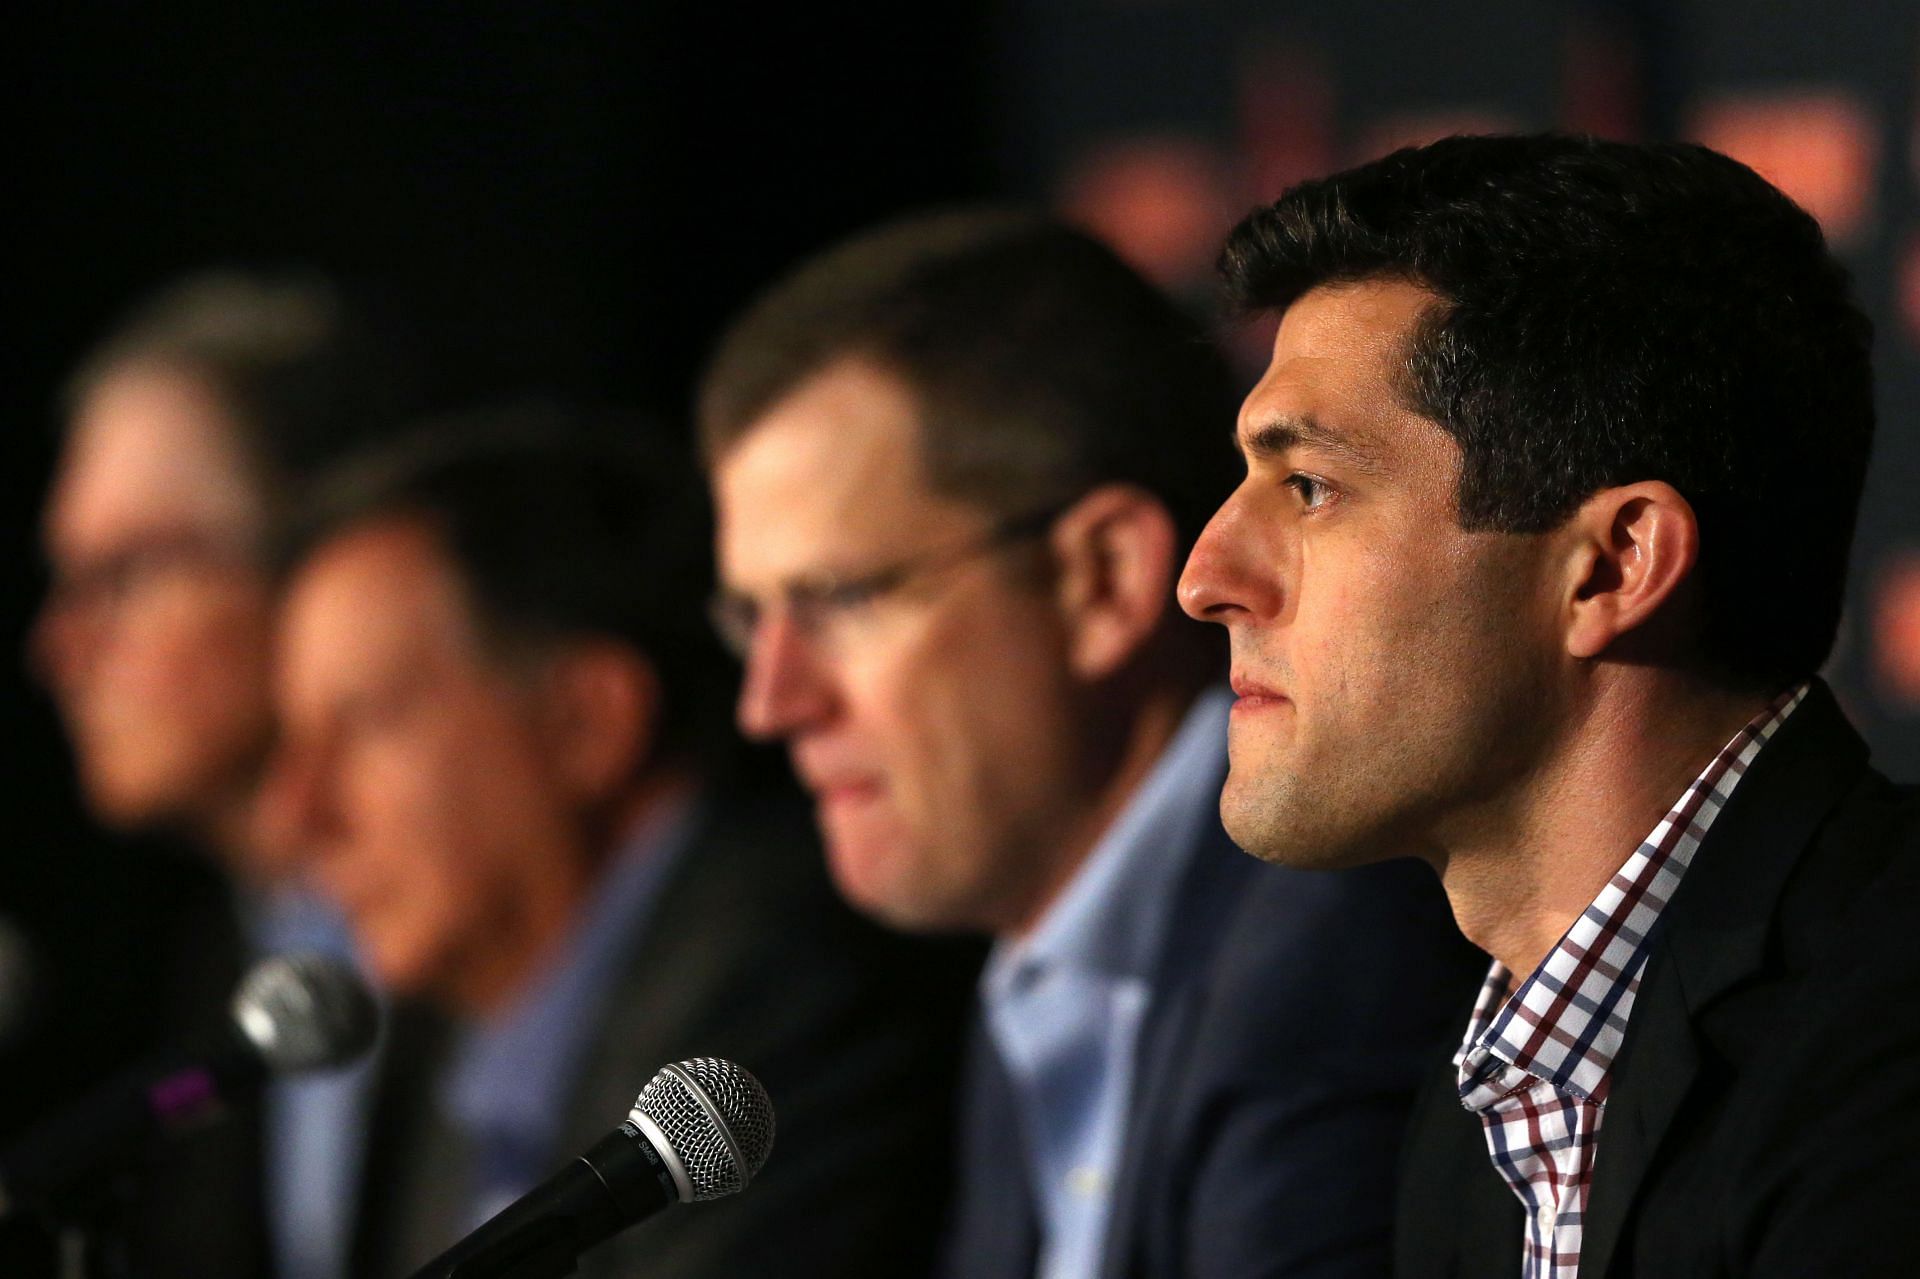 MLB analyst bemoans recent Boston Red Sox roster decisions